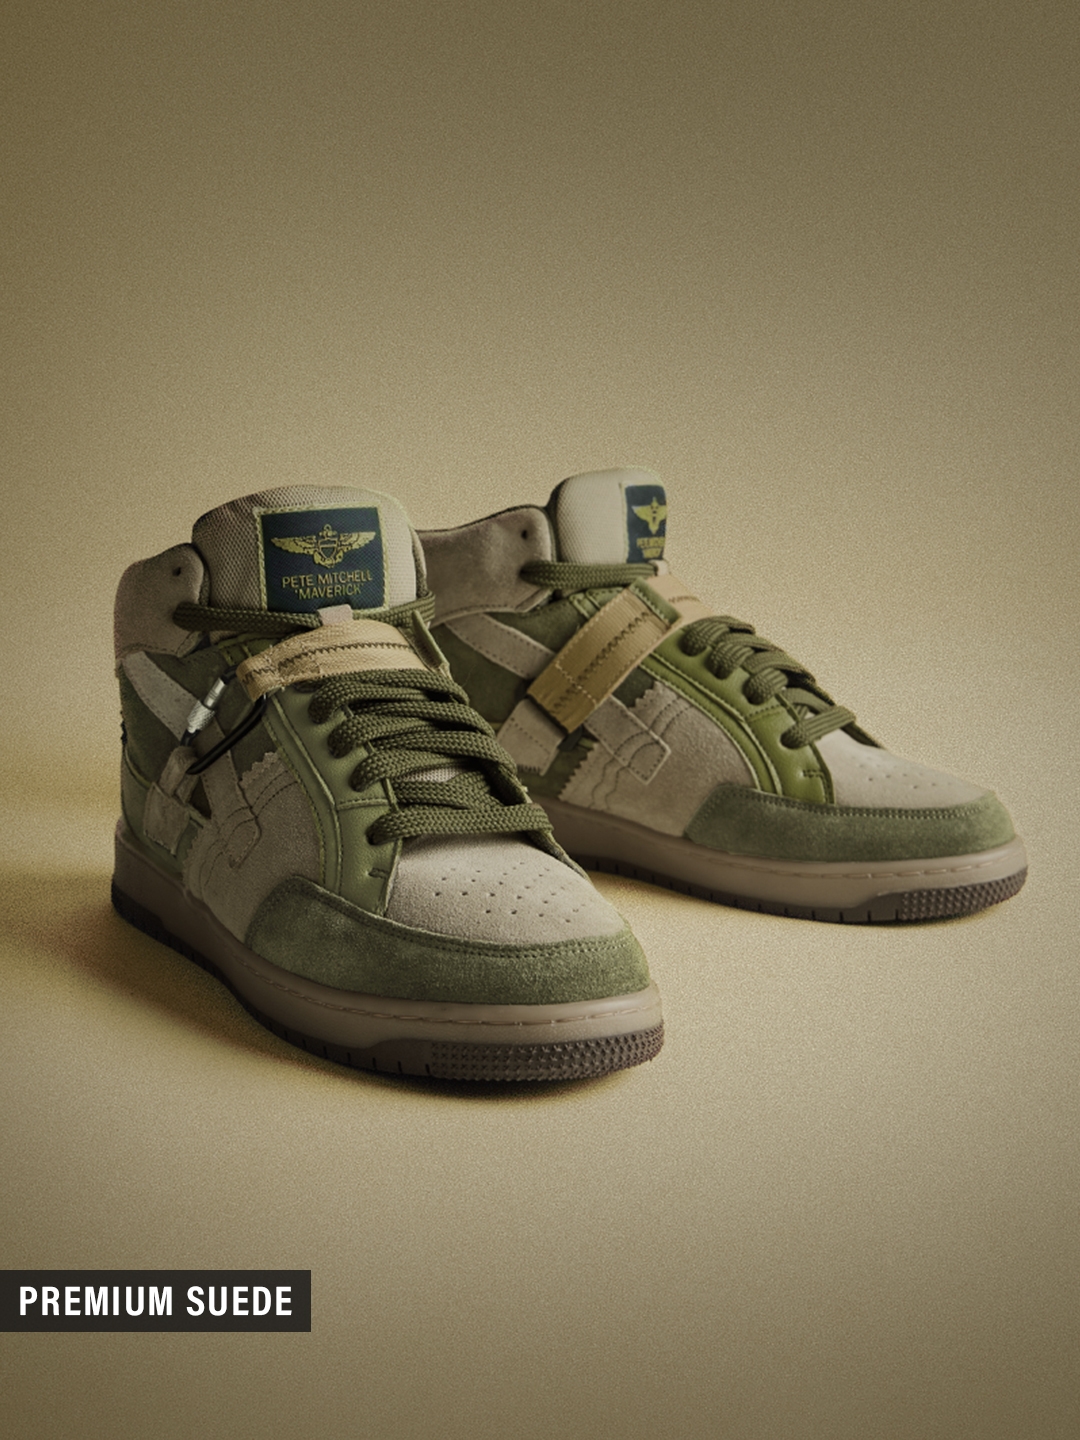 The Souled Store | The Soulted Store Official Top Gun: Maverick Kicks Men High Top Sneakers